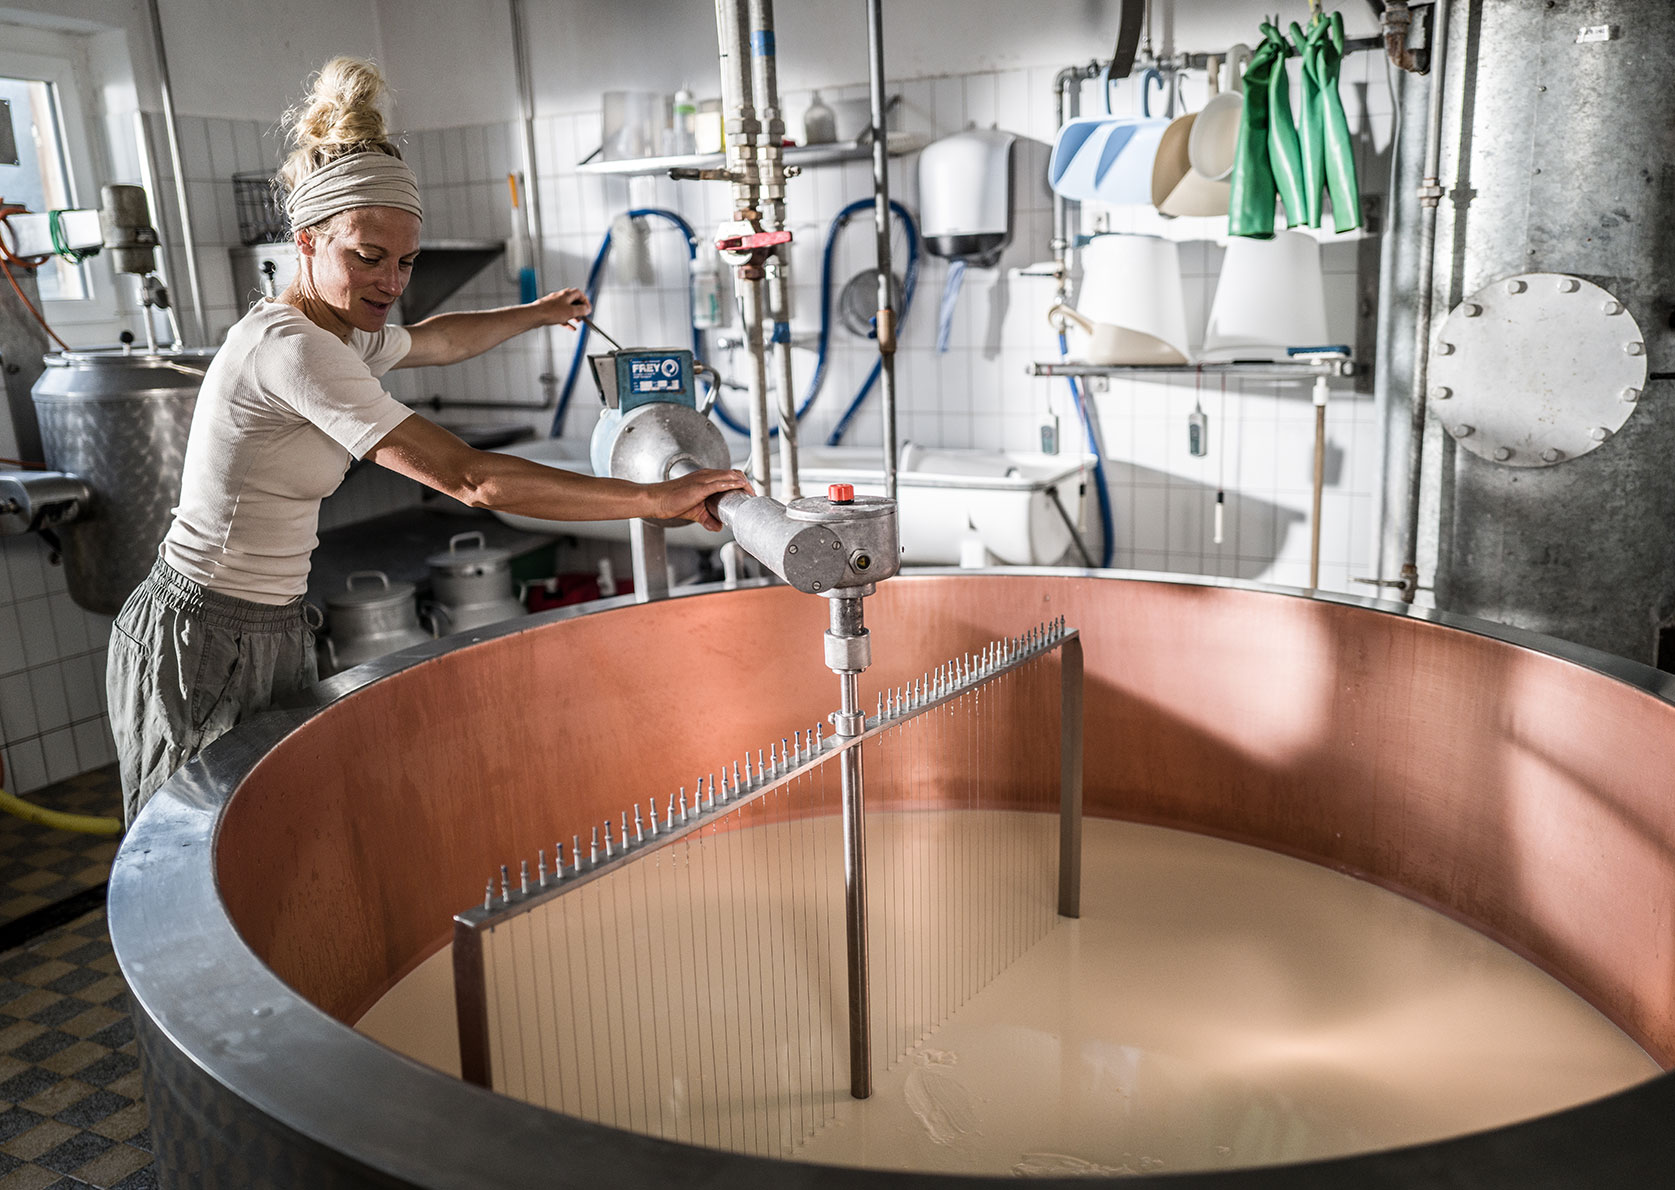 Katharina uses a cutting instrument to stir milk in a copper vat